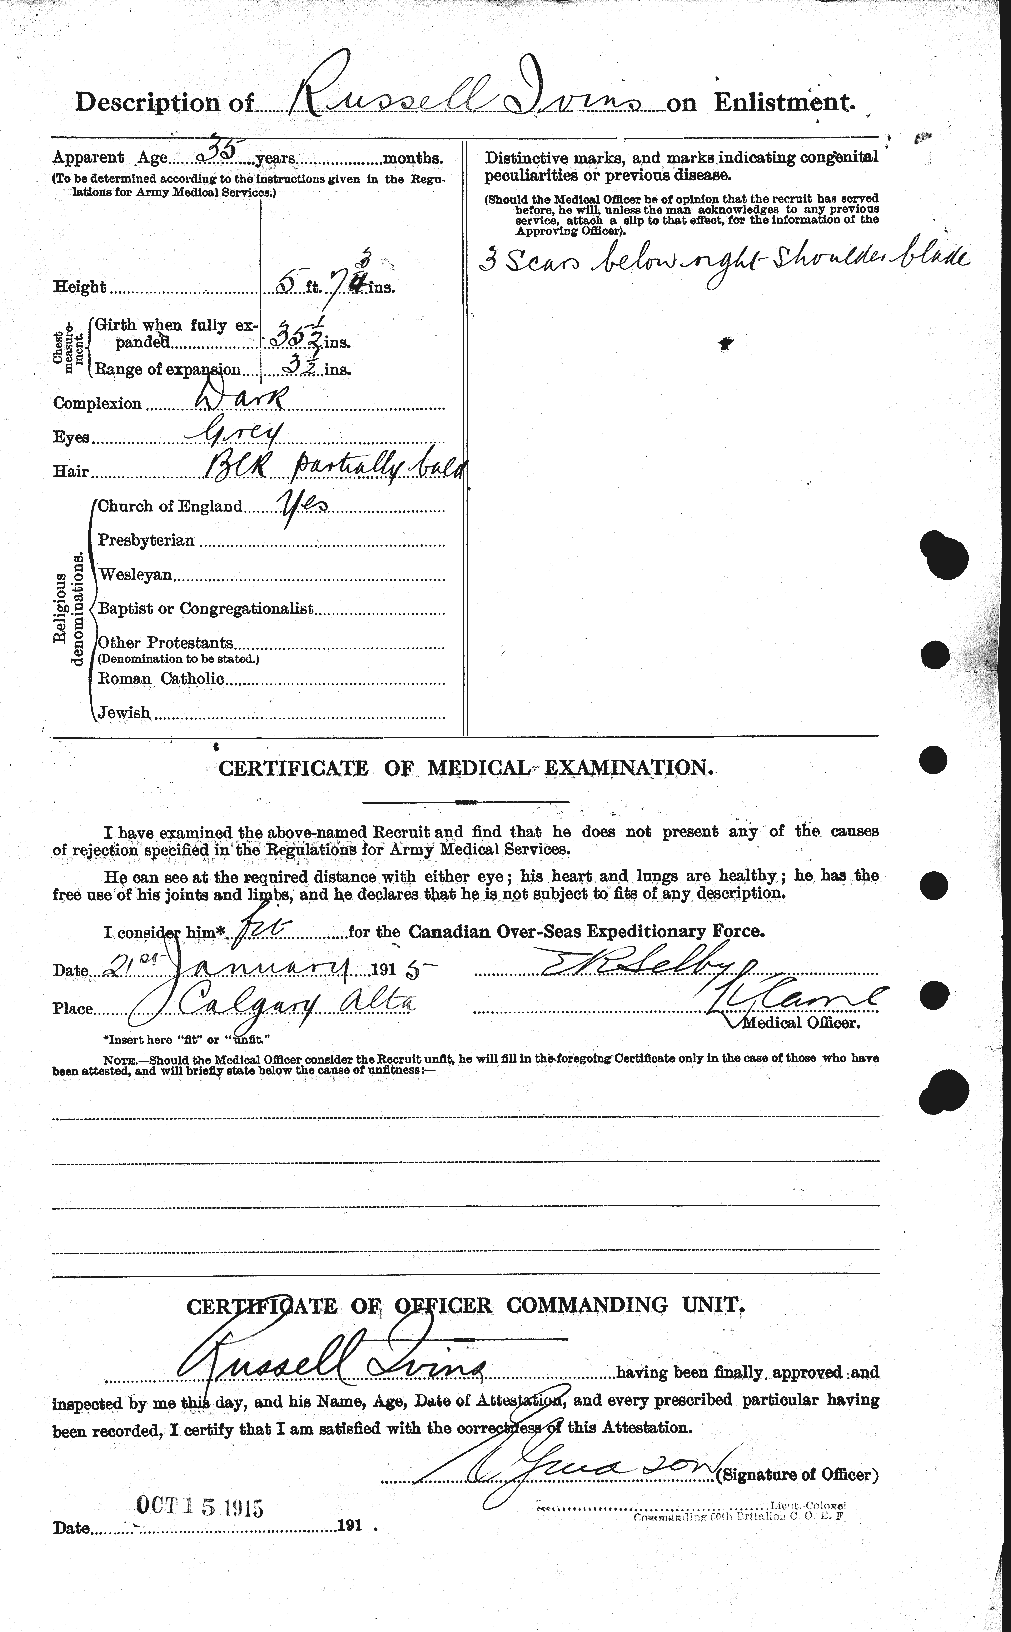 Personnel Records of the First World War - CEF 415156b